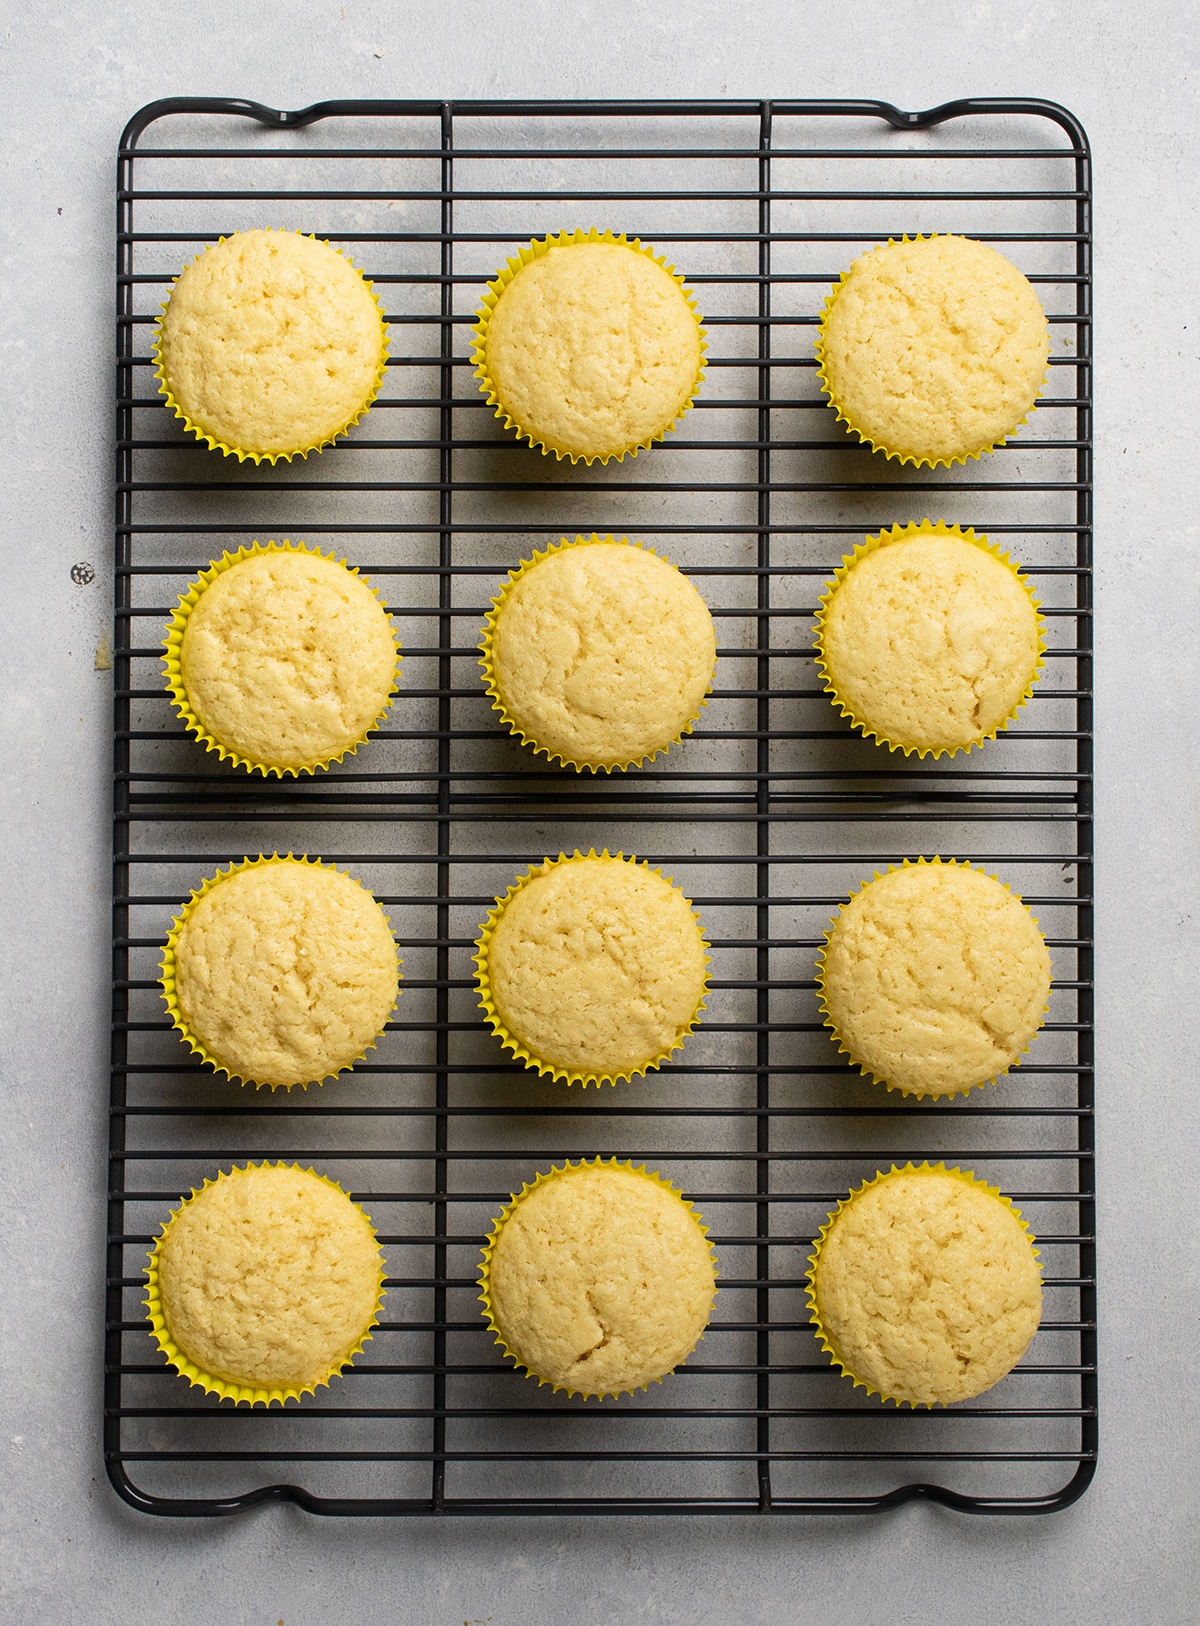 Lemon cupcakes cooling on a wire rack.